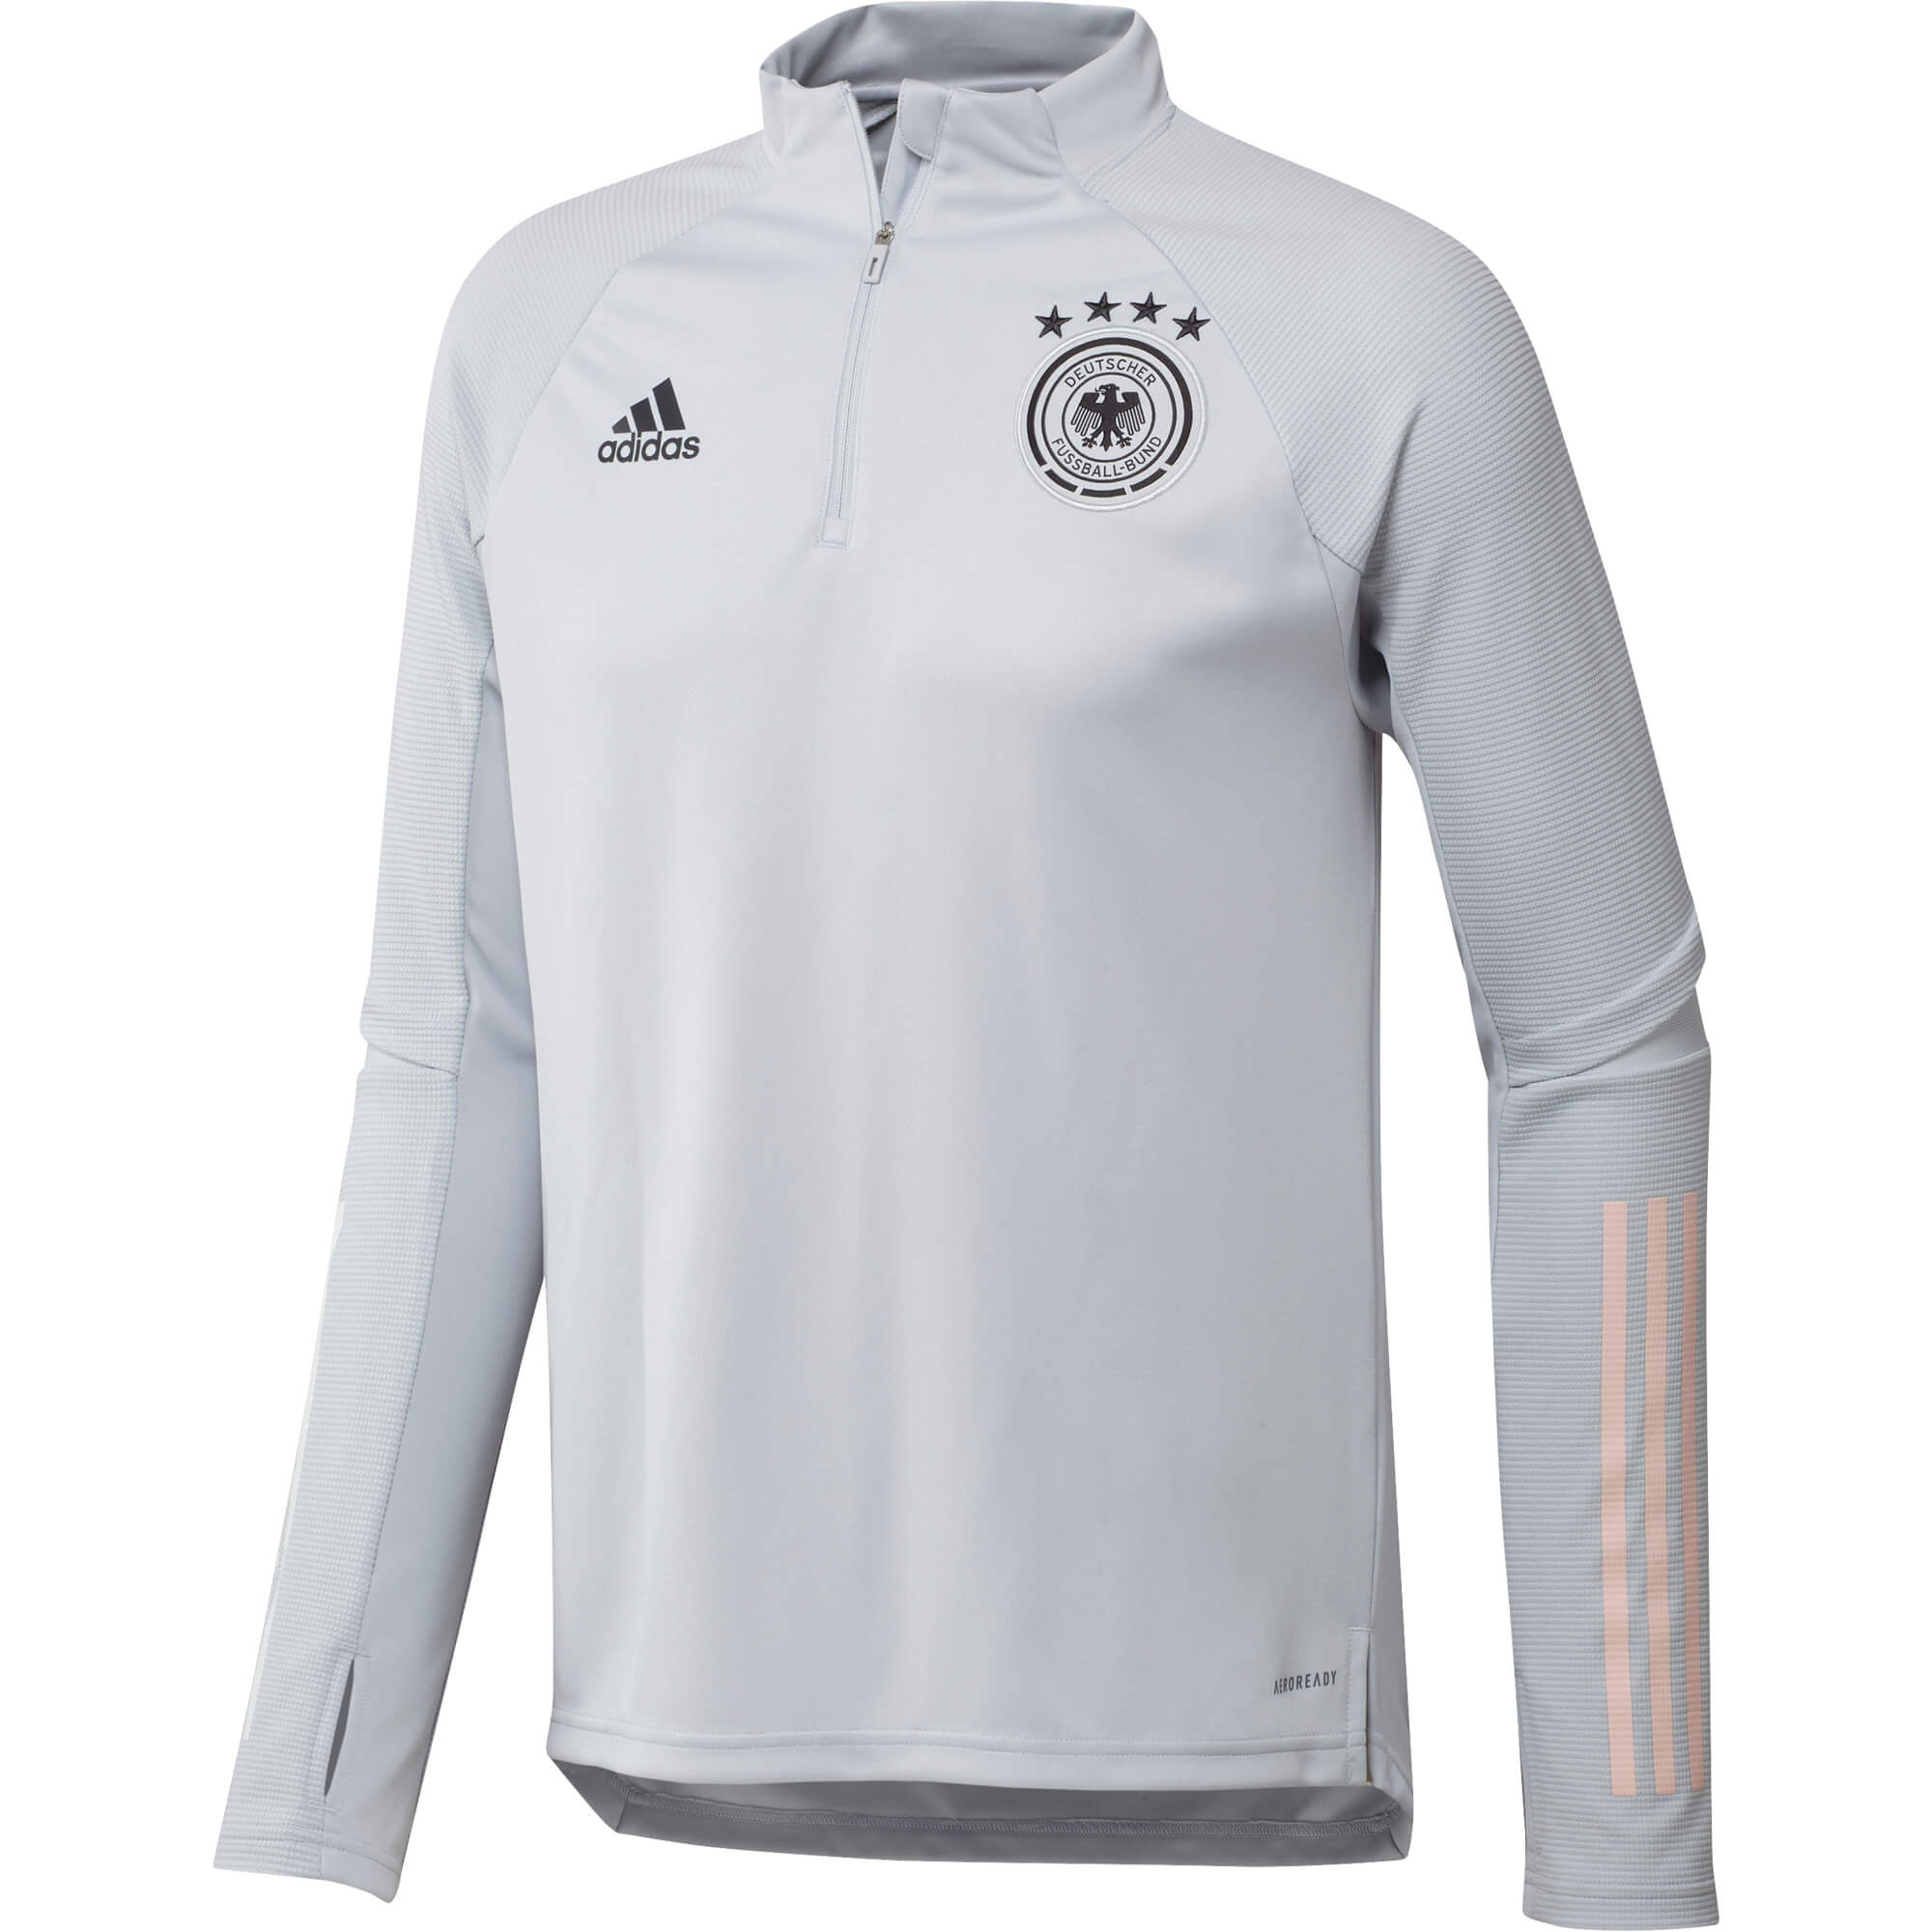 ADIDAS ALLEMAGNE TRG TOP GRIS 2020